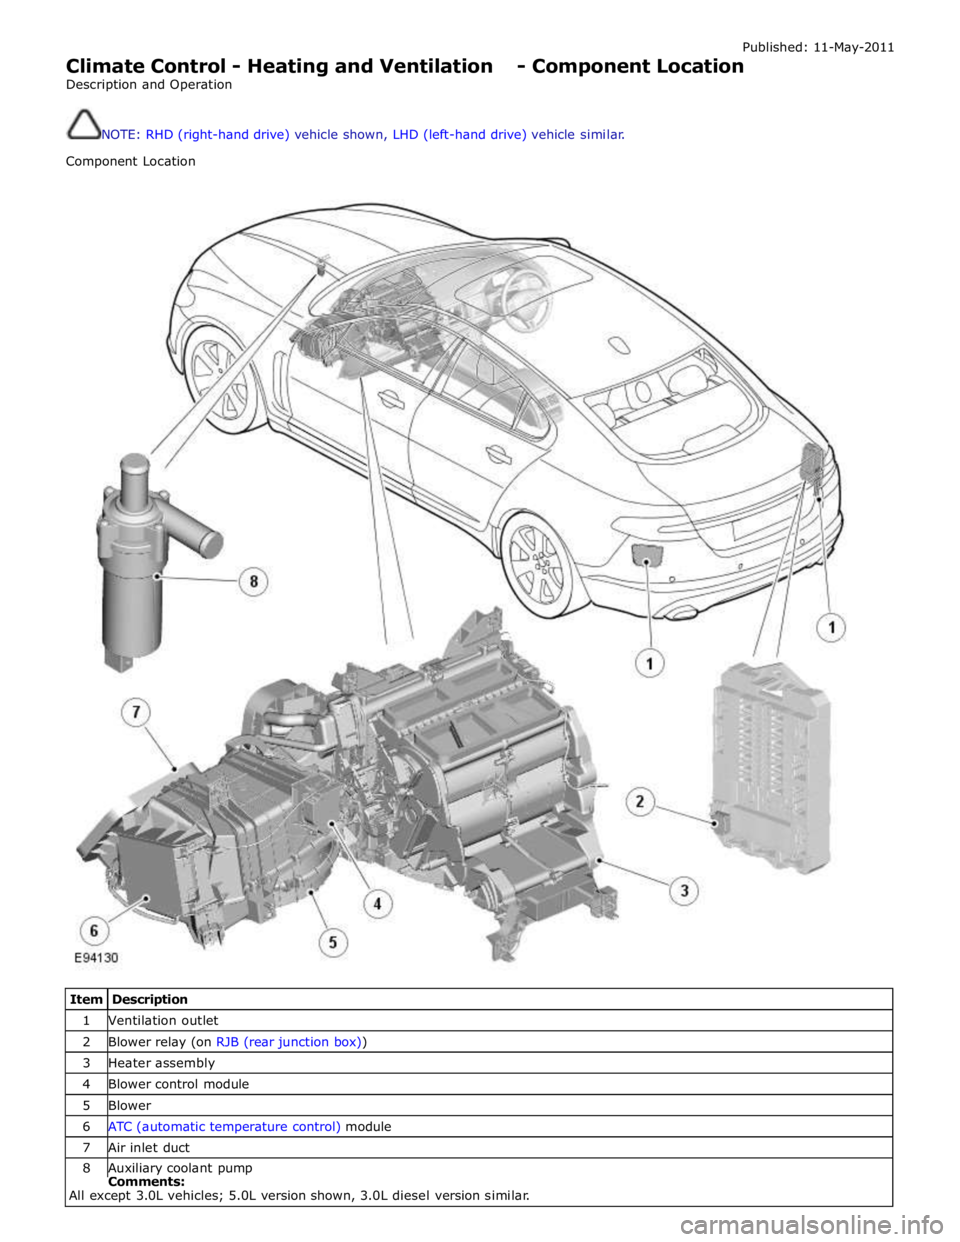 JAGUAR XFR 2010 1.G Service Manual Published: 11-May-2011 
Climate Control - Heating and Ventilation - Component Location 
Description and Operation 
 
 
NOTE: RHD (right-hand drive) vehicle shown, LHD (left-hand drive) vehicle similar